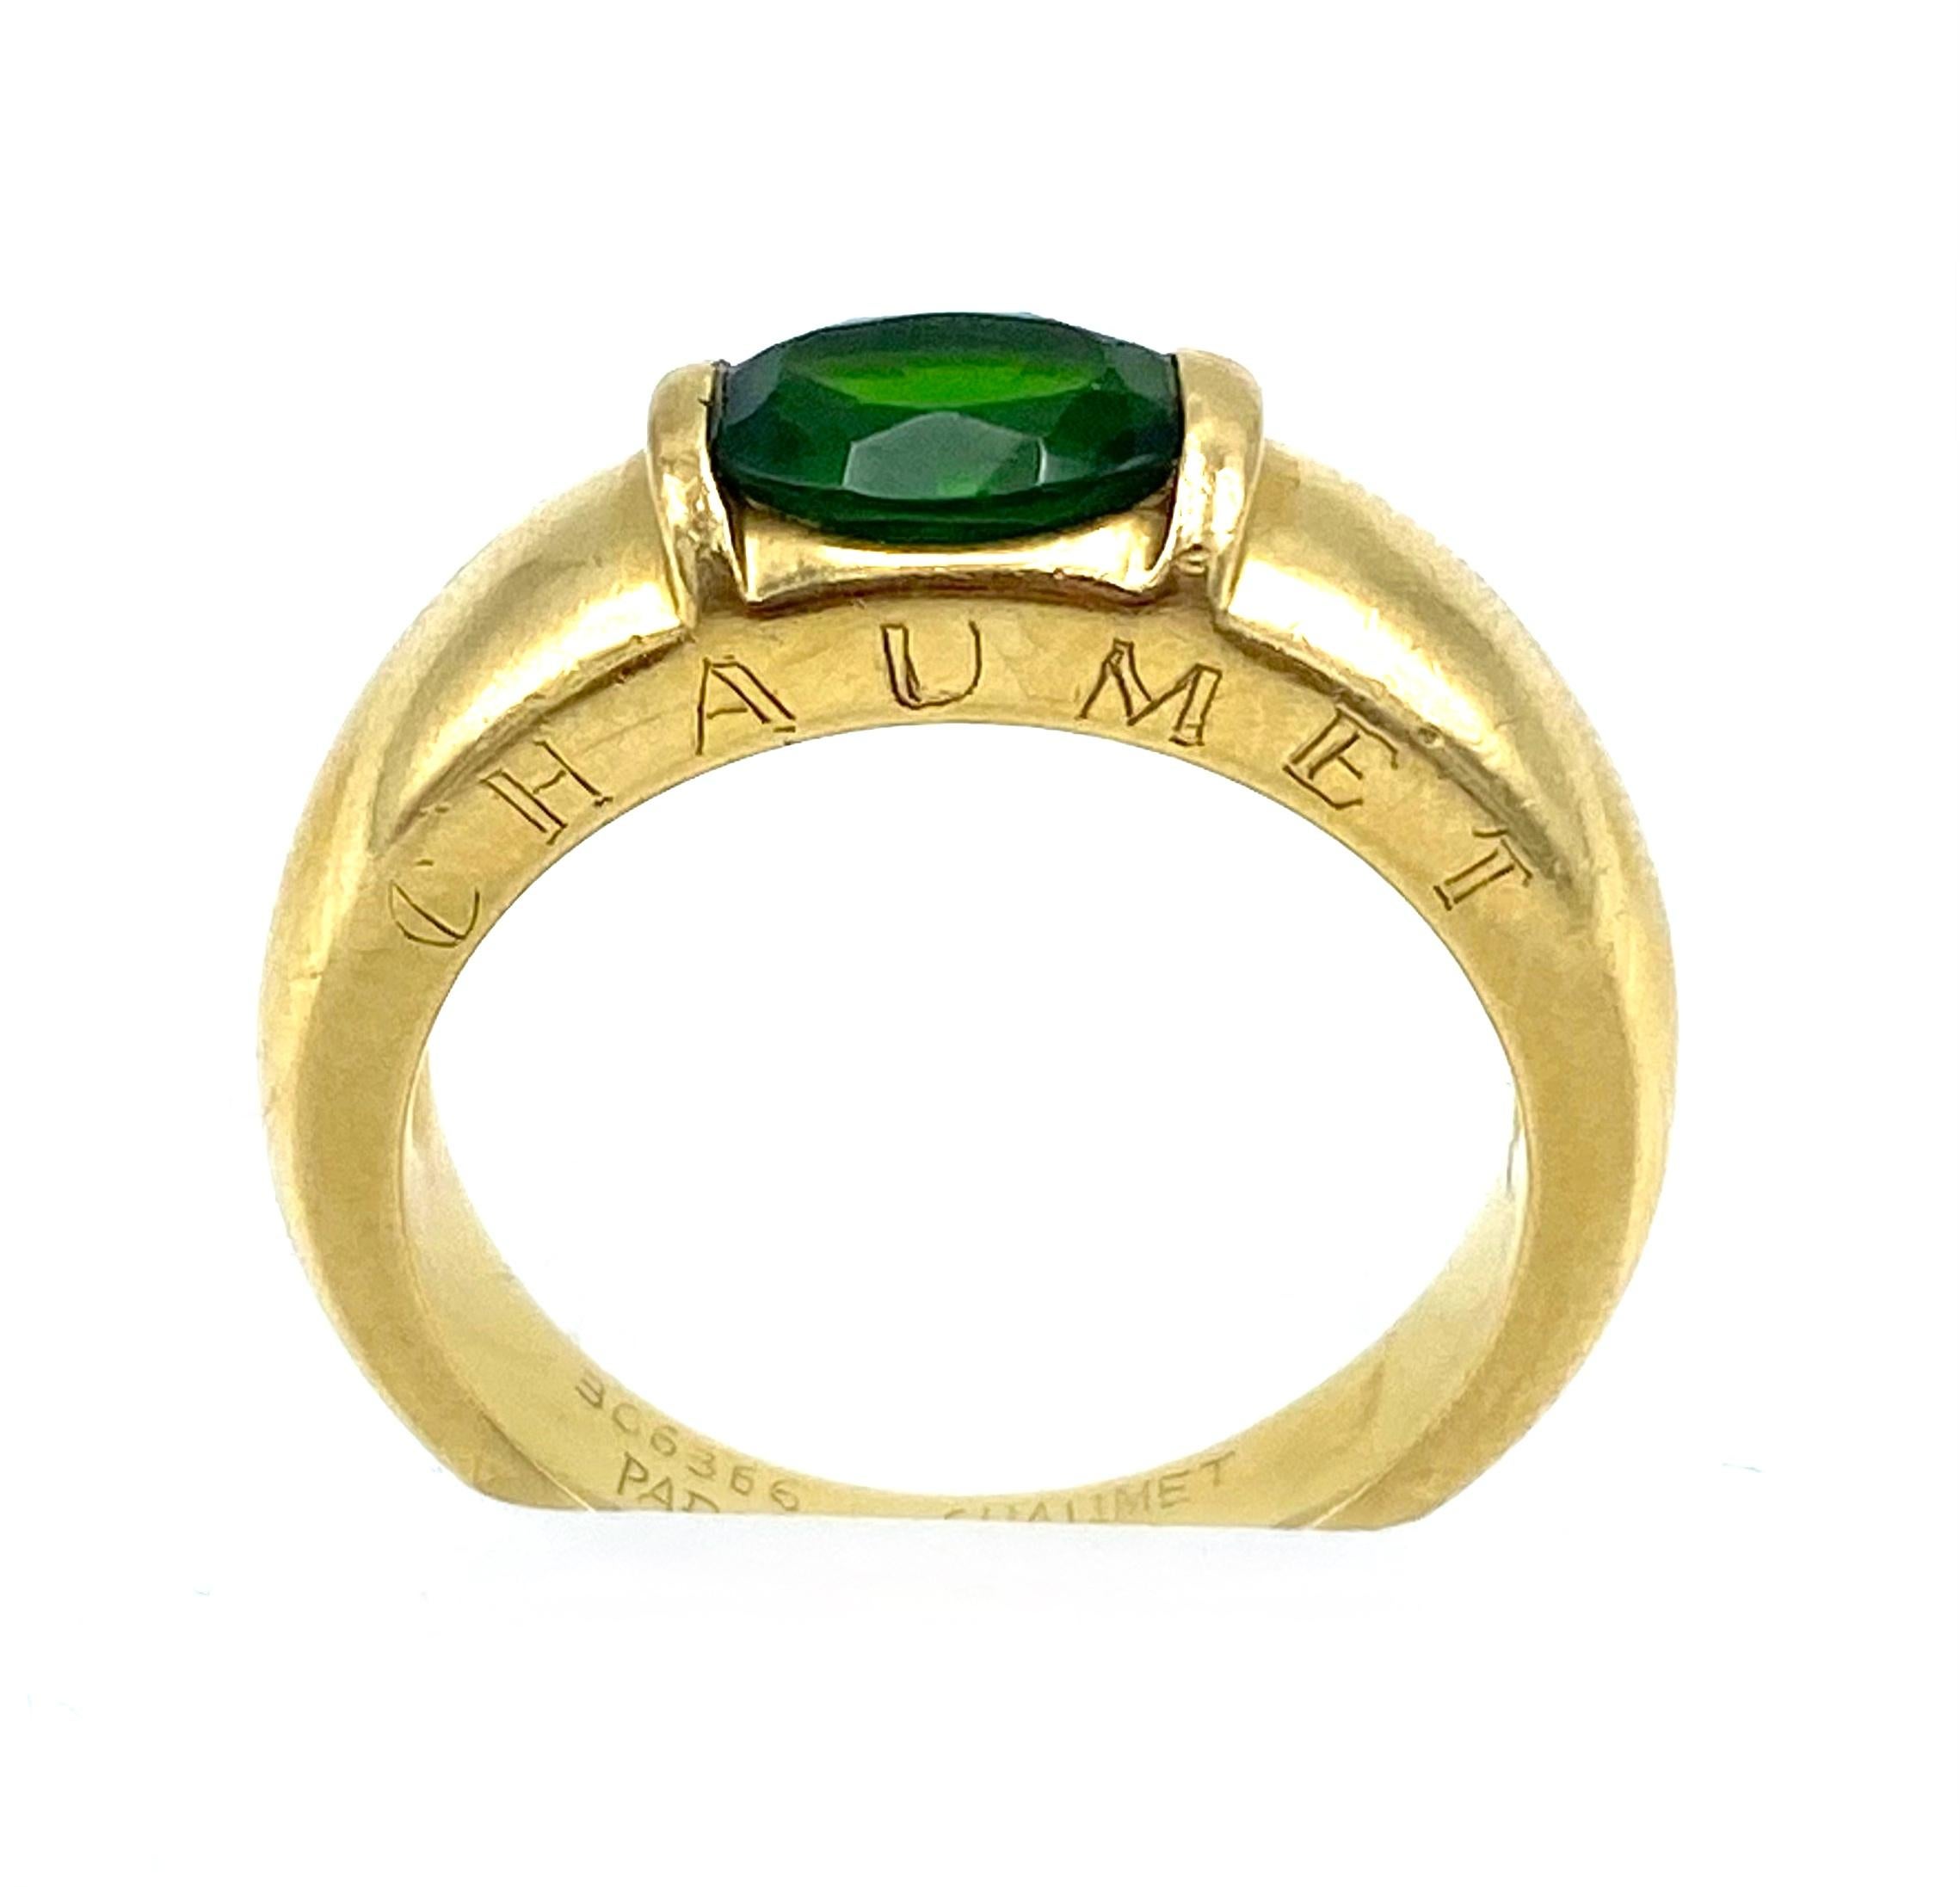 Product details:

The ring is designed by French jewelry designer Chaumet, it is made out of 18 karat yellow gold and detailed with oval cut green peridot.

Hallmarks: 366366 Paris Chaumet 750 

Ring size is 8.25.
The width on the top is 6mm and the